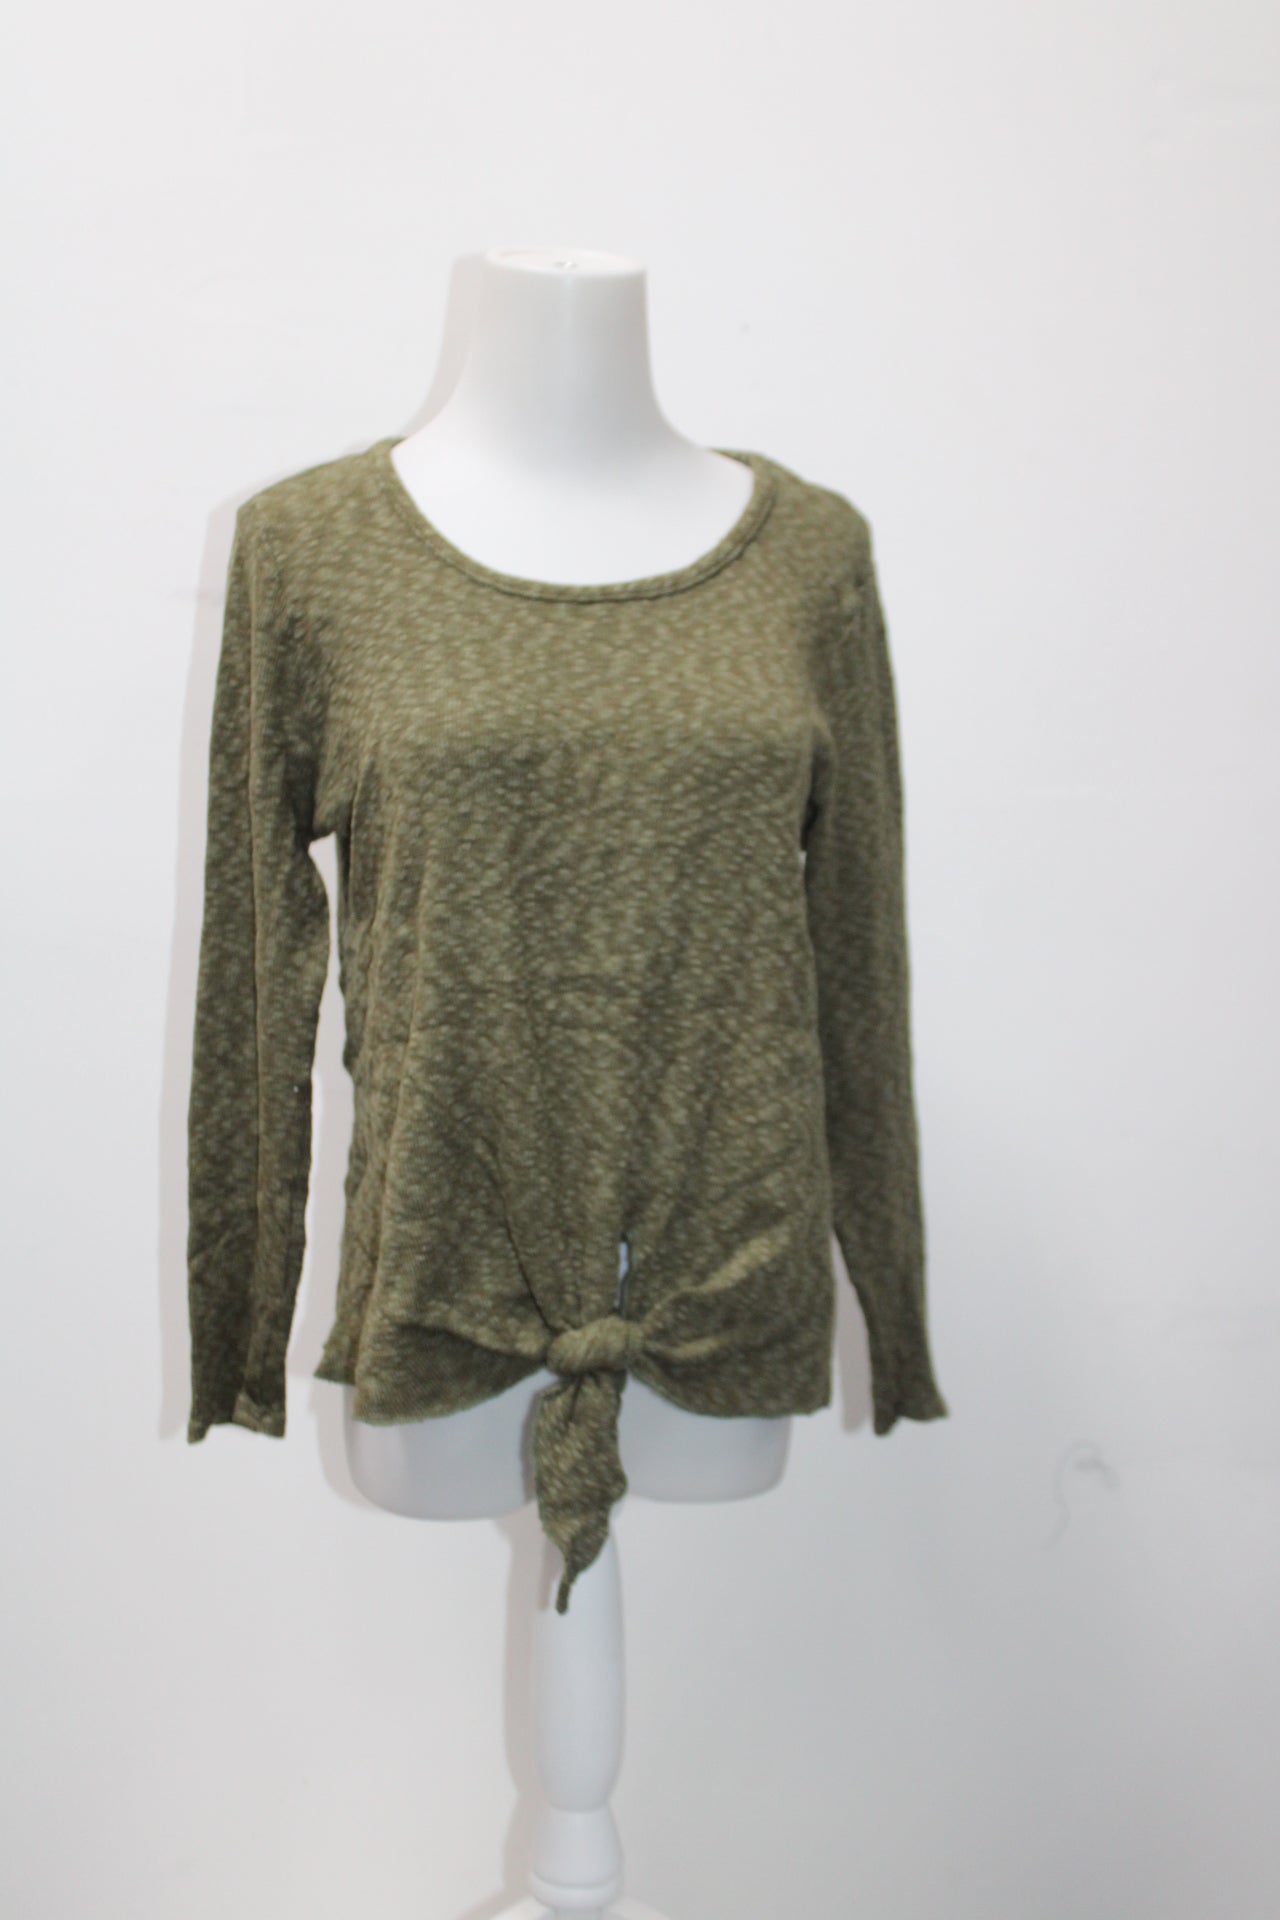 Kim & Cami Women's Top Green M Pre-Owned